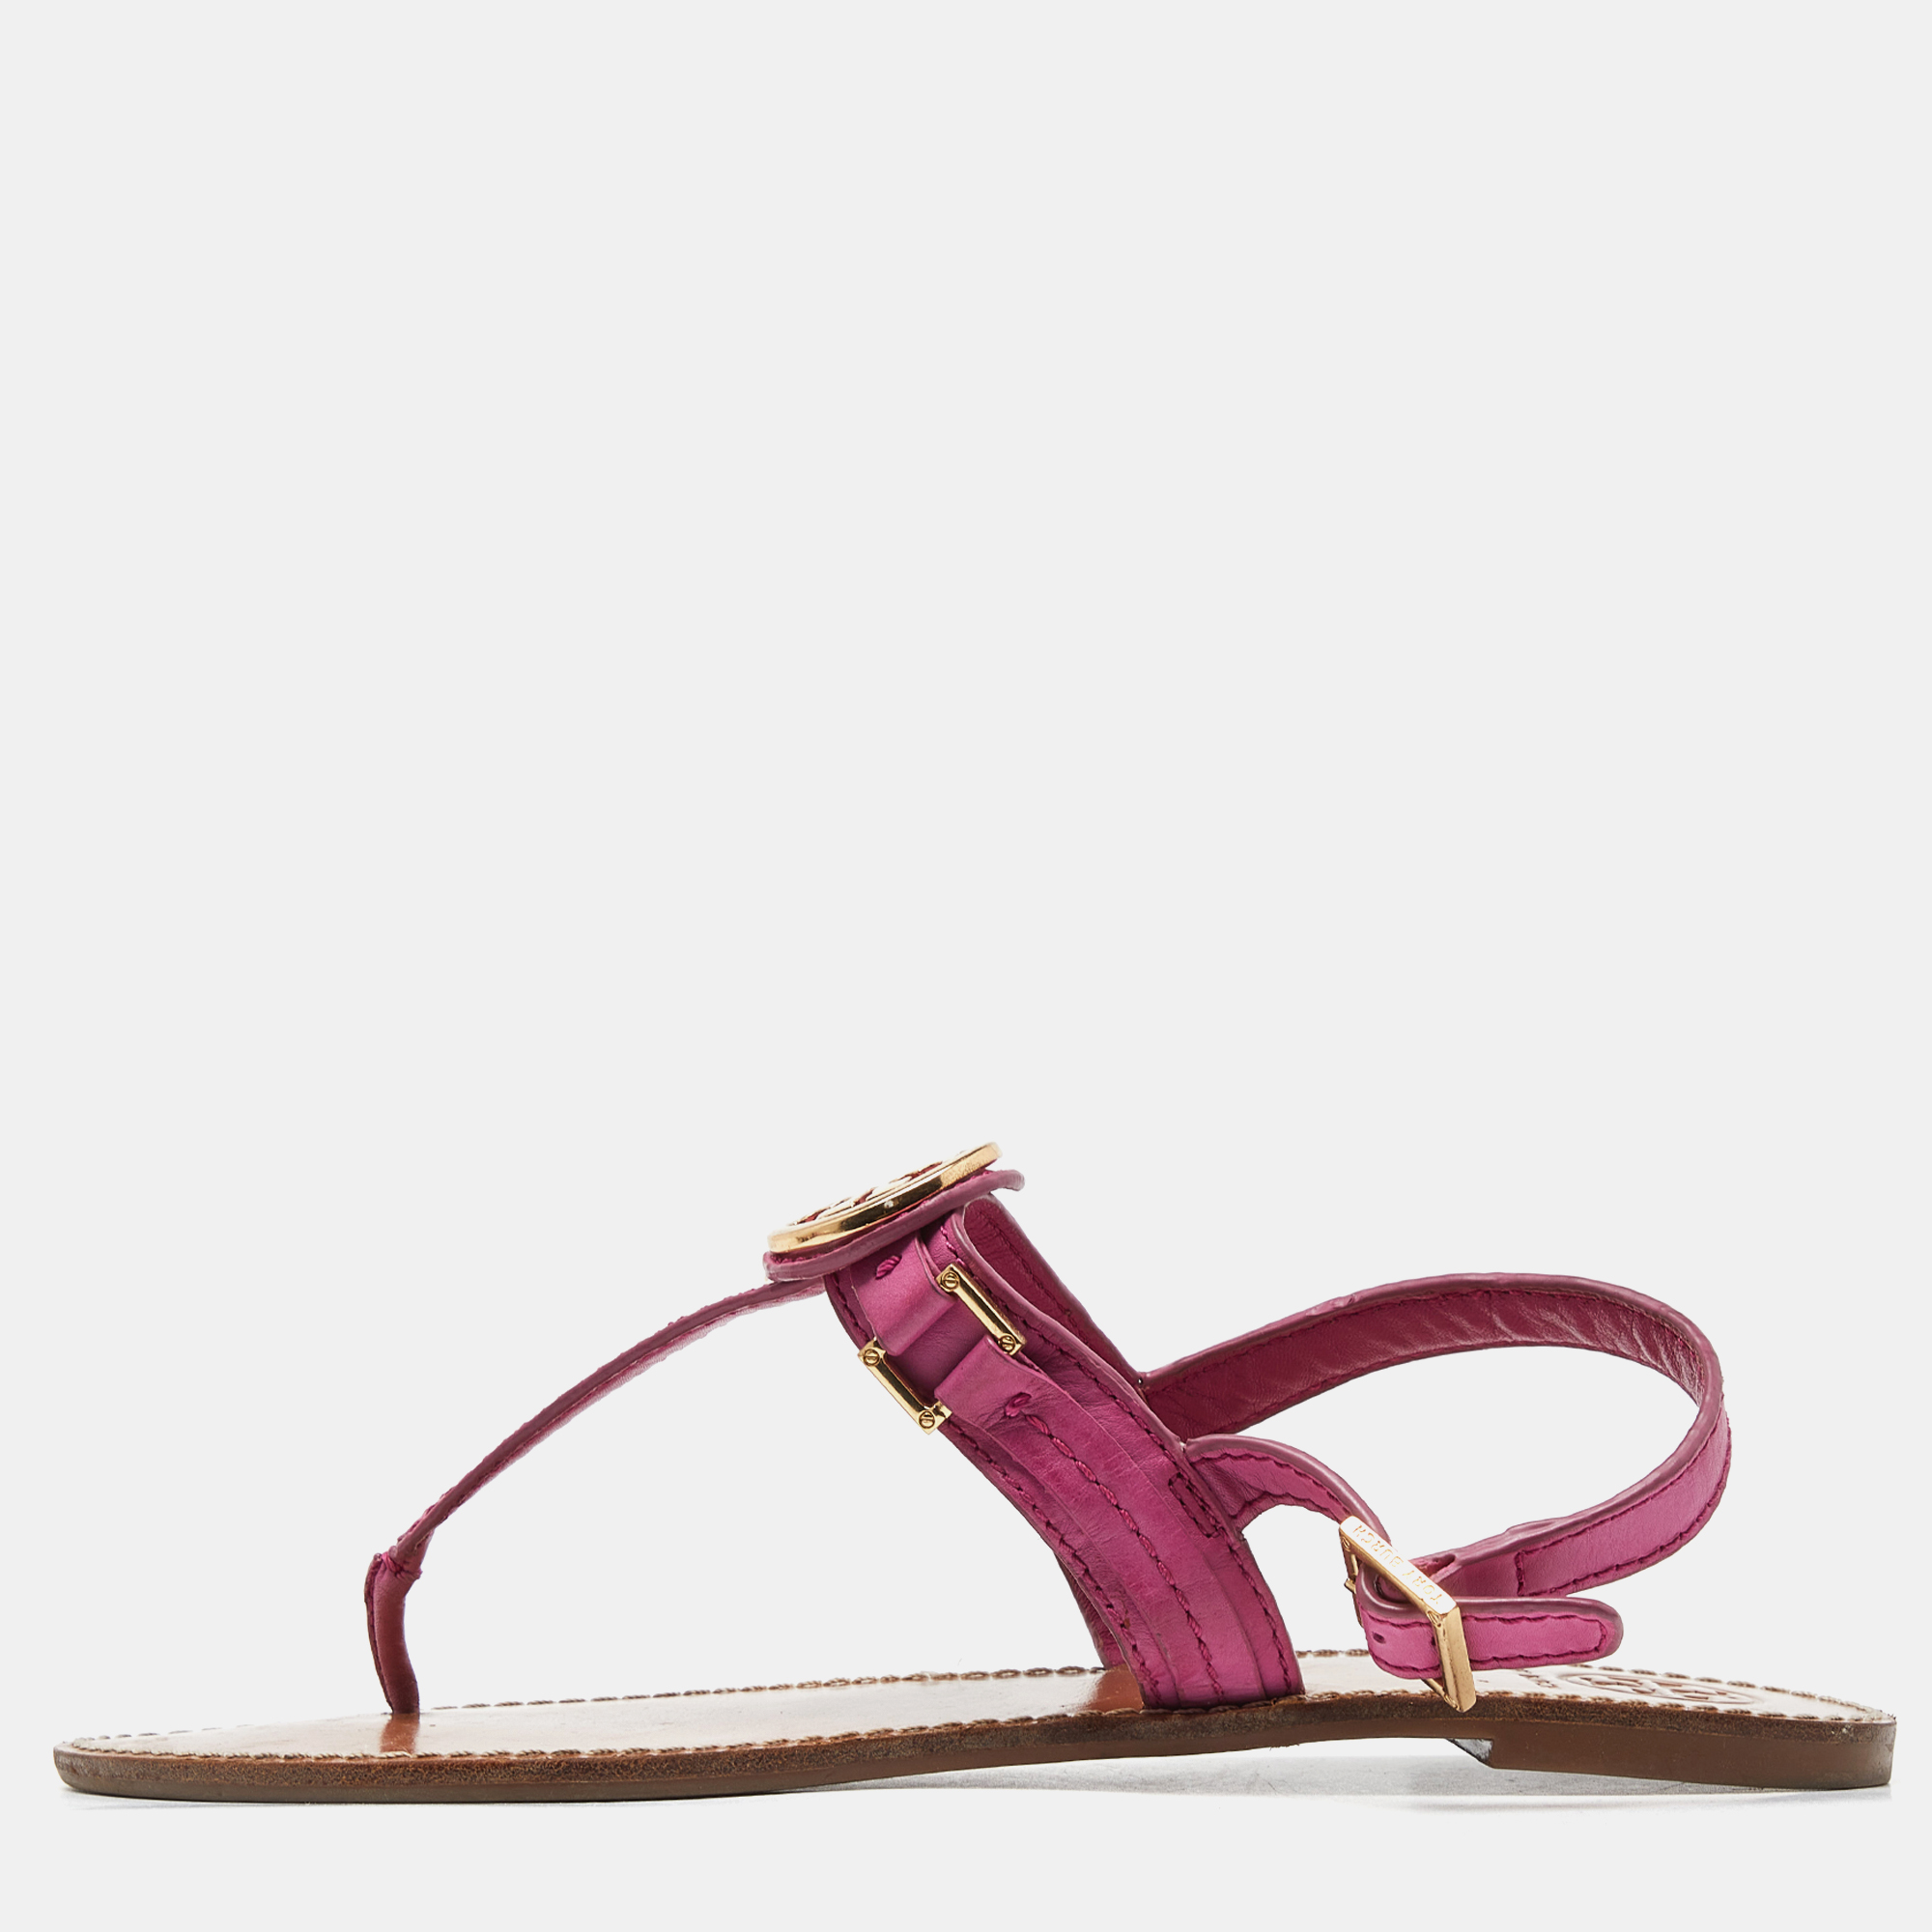 Tory burch pink leather logo detail thong slingback flat sandals size 41